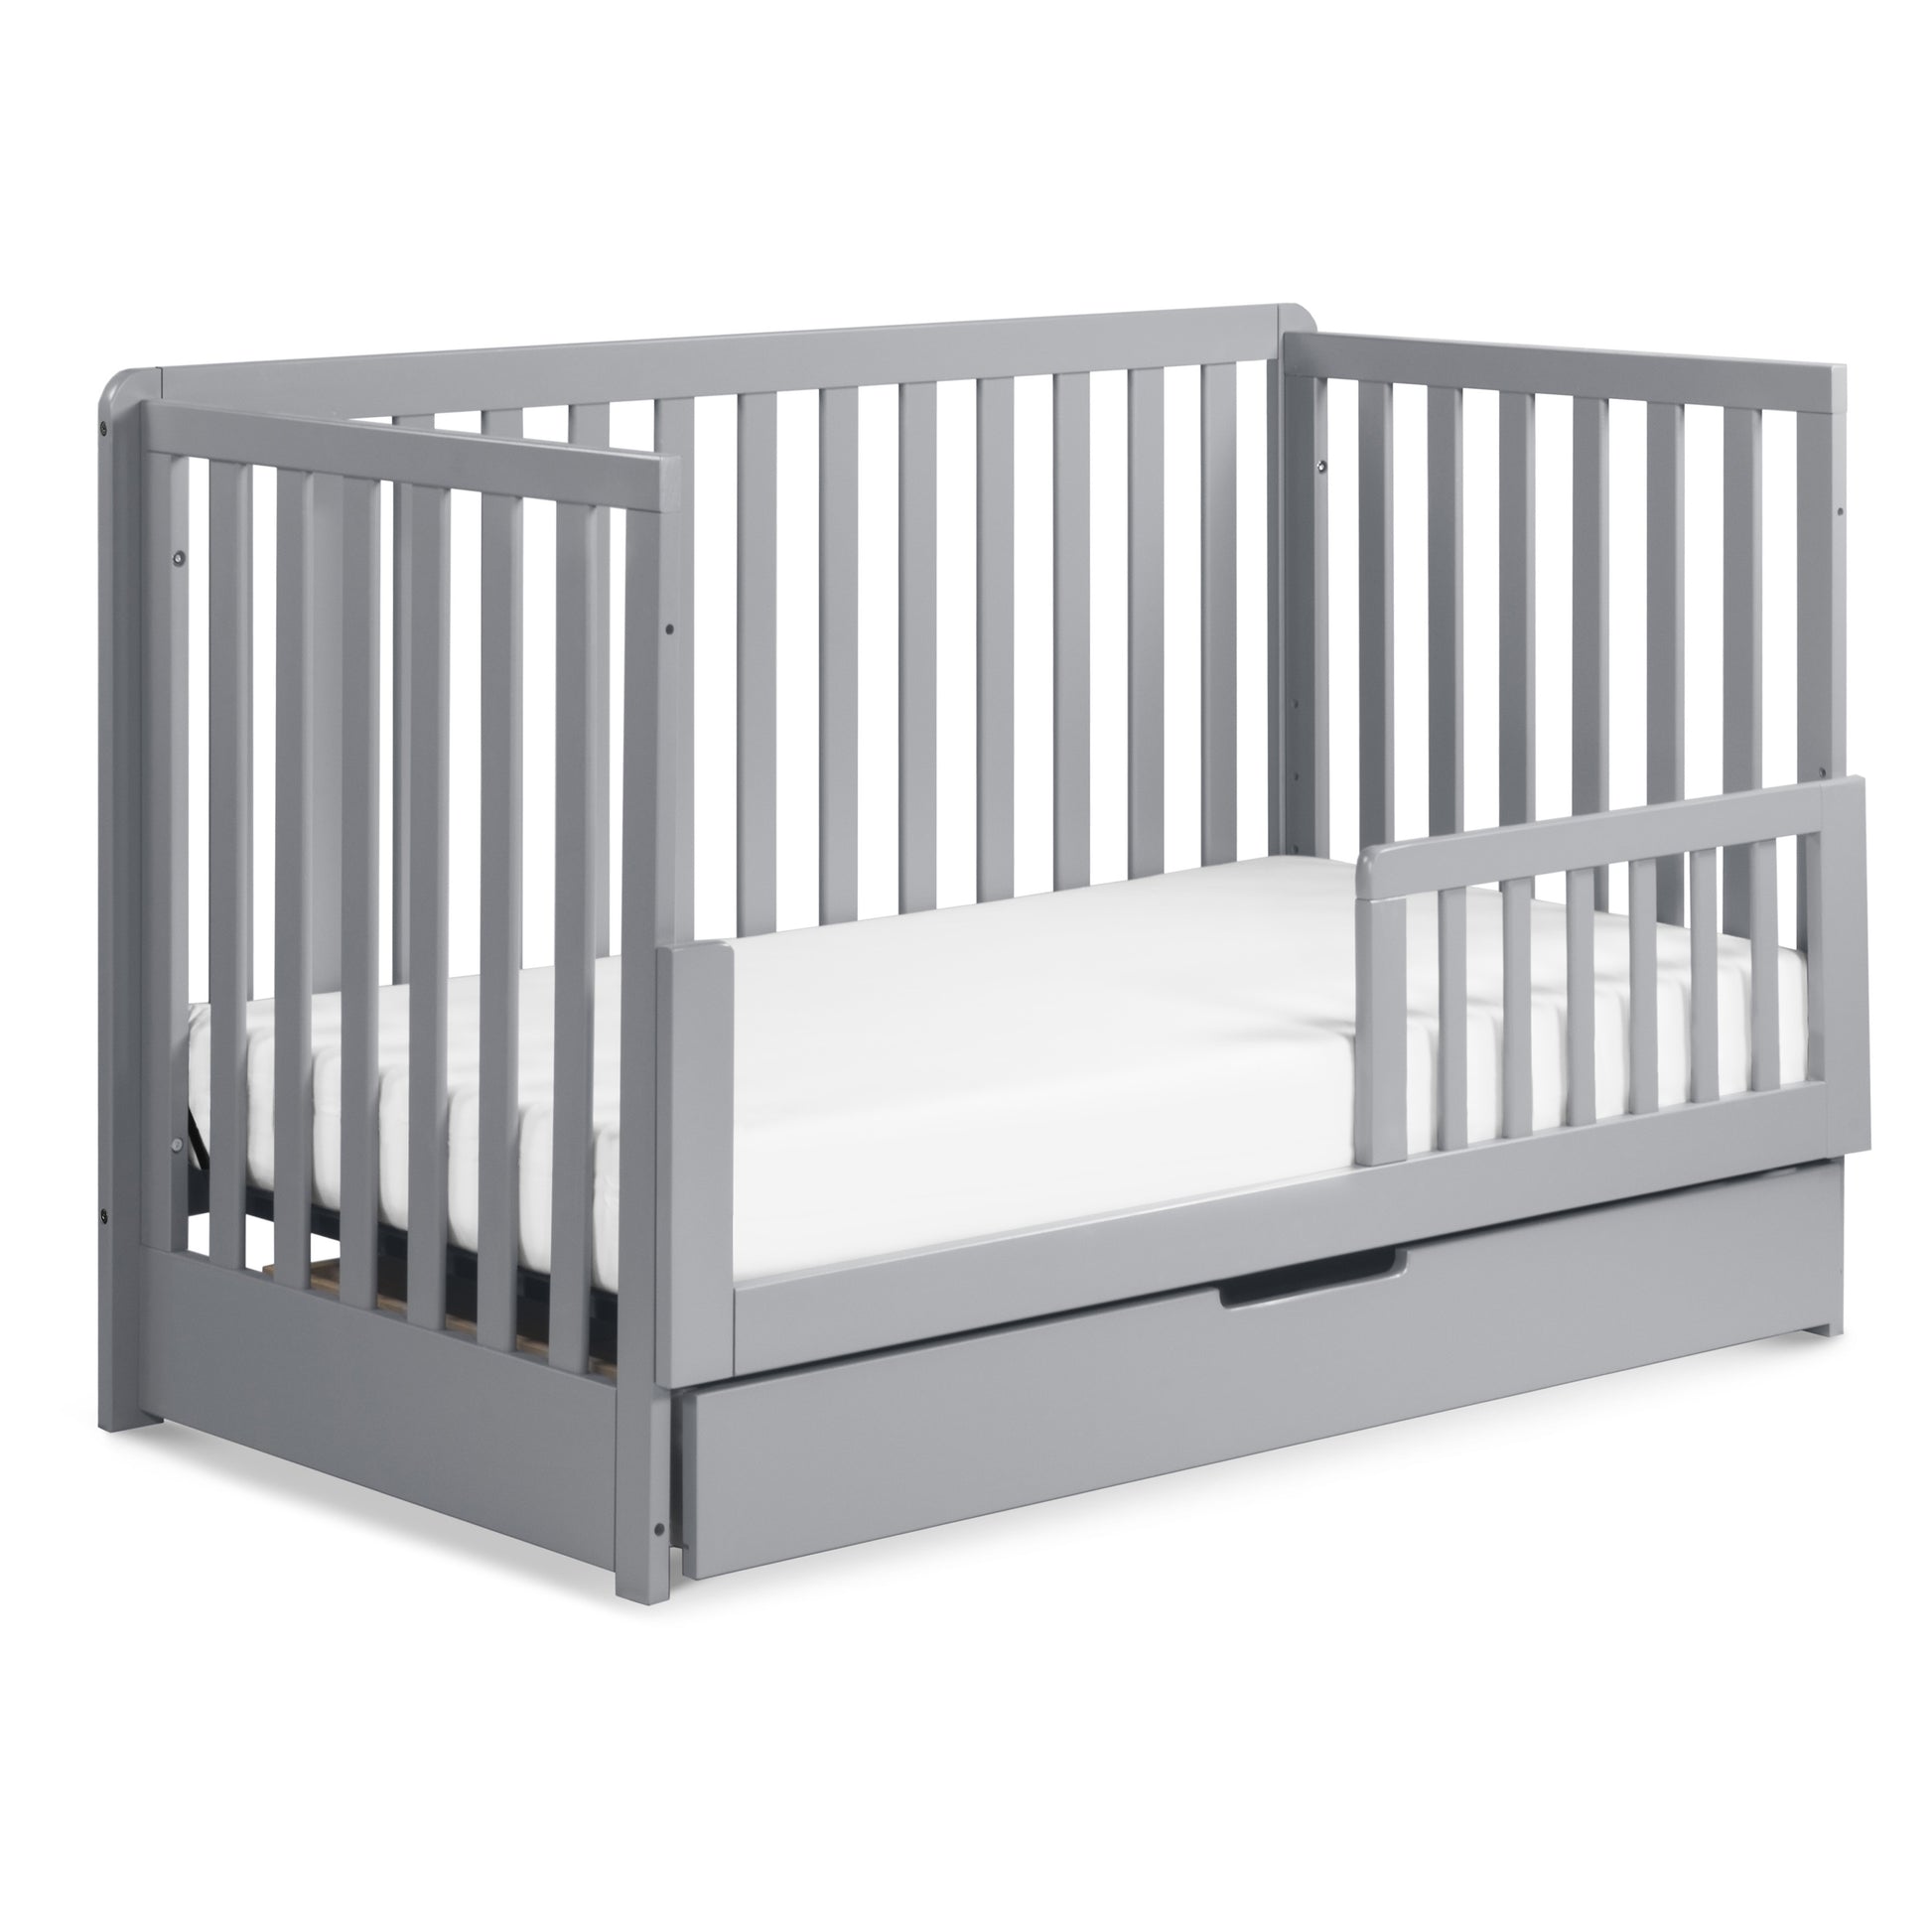 F11951G,Colby 4-in-1 Convertible Crib w/ Trundle Drawer in Grey